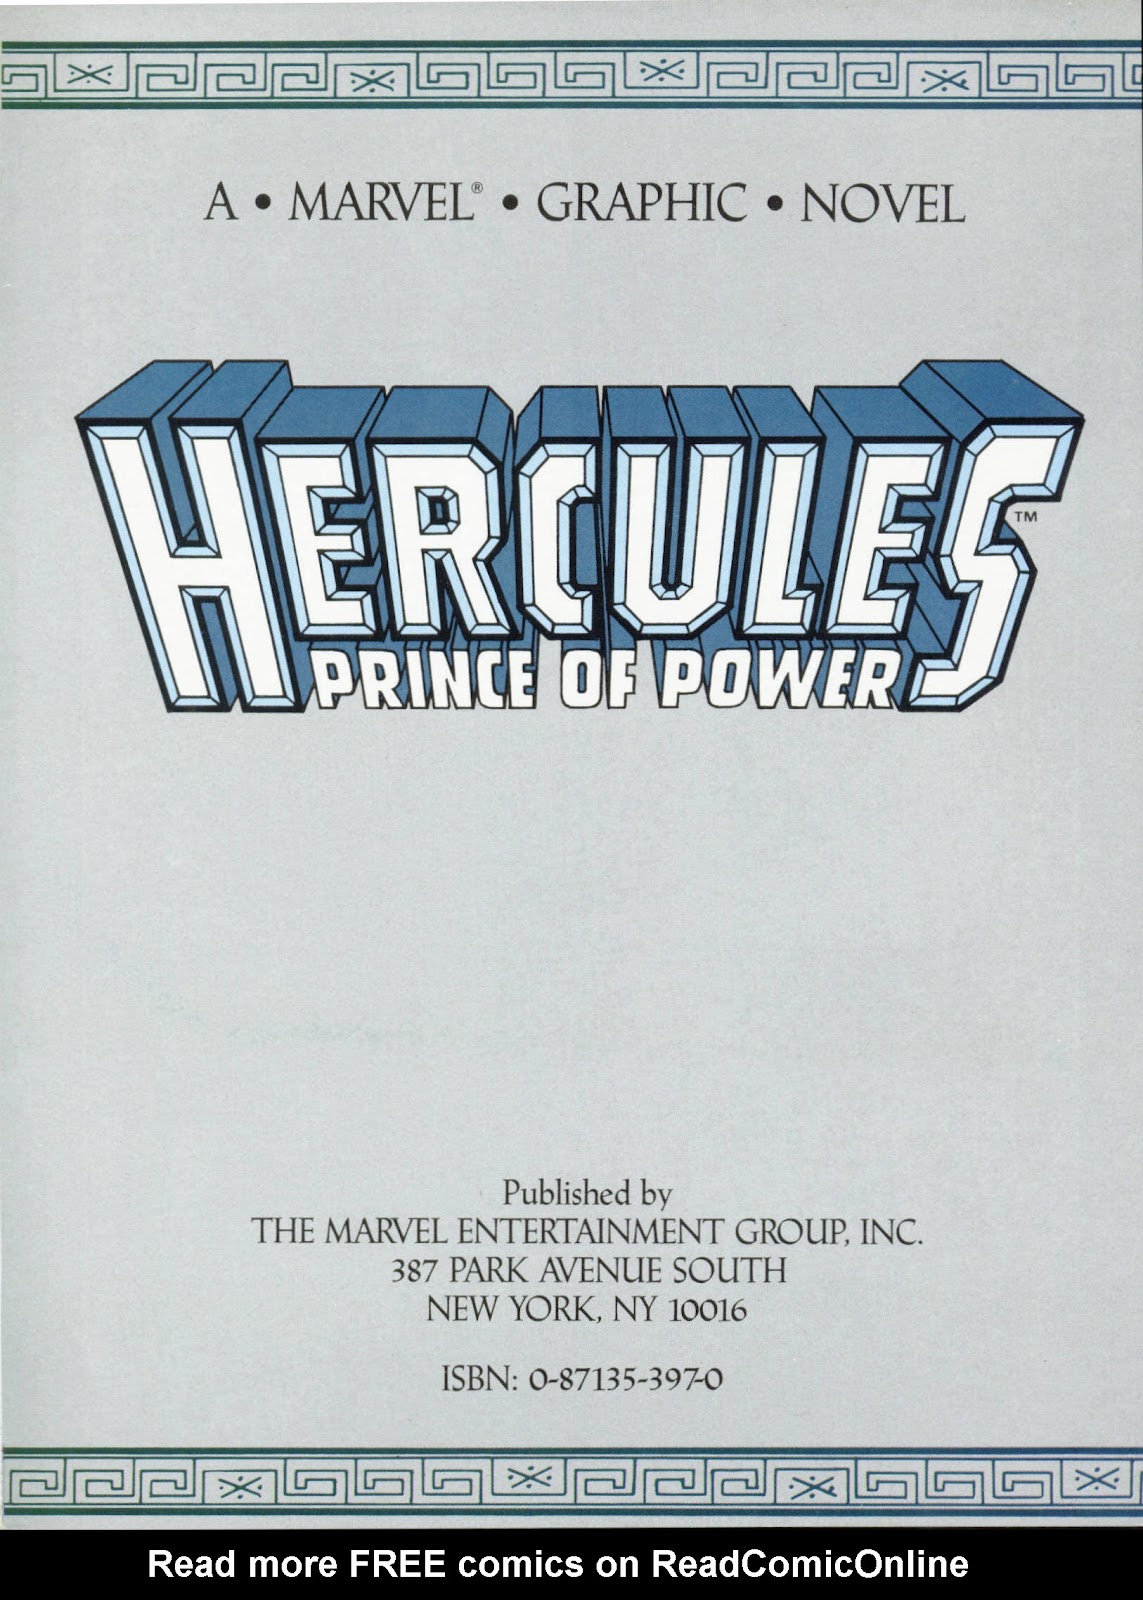 Marvel Graphic Novel issue 37 - Hercules Prince of Power - Full Circle - Page 2